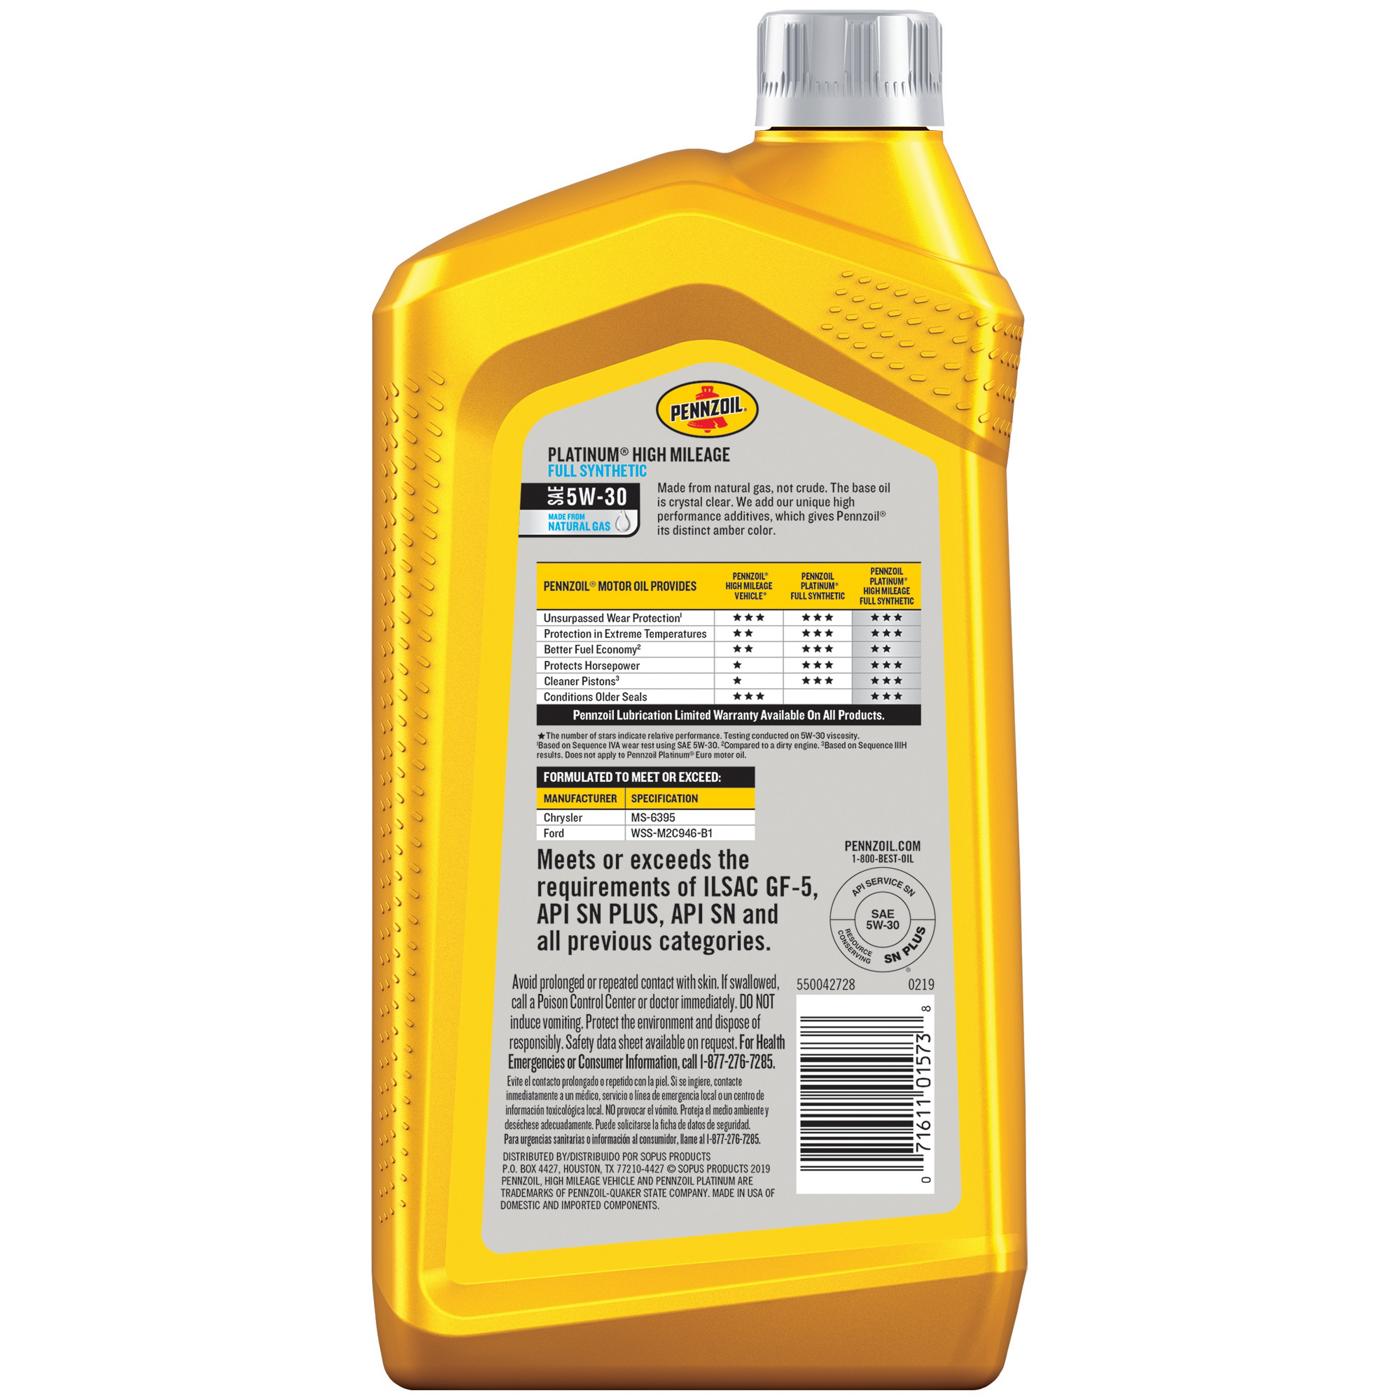 Pennzoil 5W-30 Platinum High Mileage Full Synthetic Motor Oil; image 2 of 2